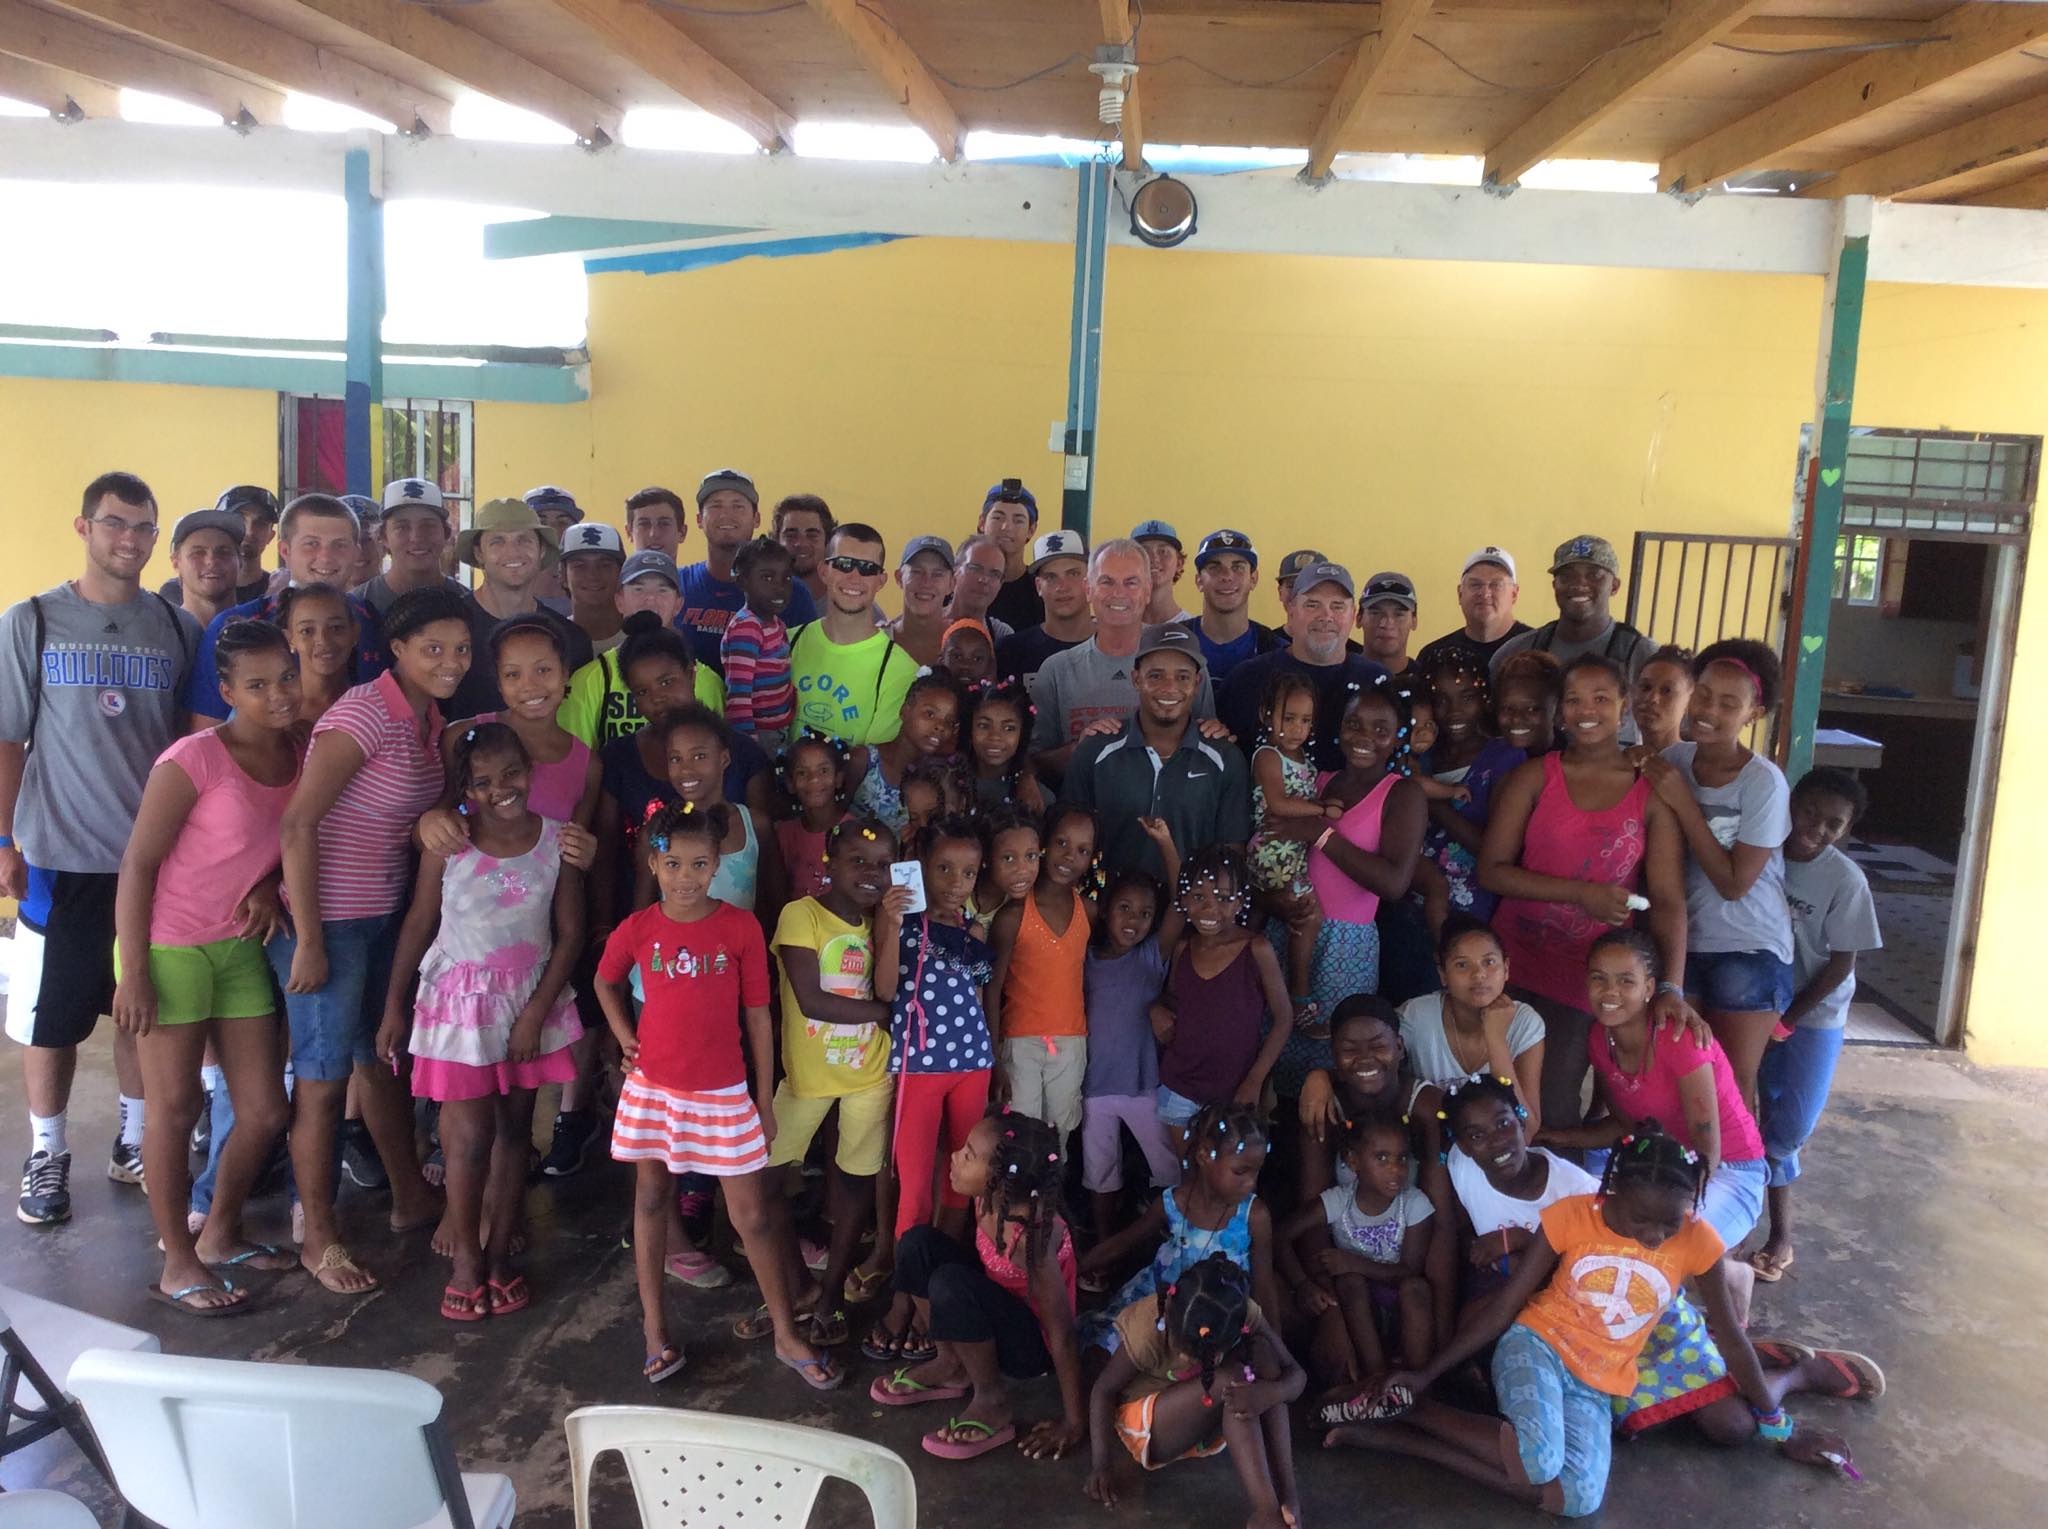 Almost 30 H.S. and College players attended the August Baseball/Mission trip to the Dominican Republic.  They visited a girls' Home-Pasitos de Jesus.